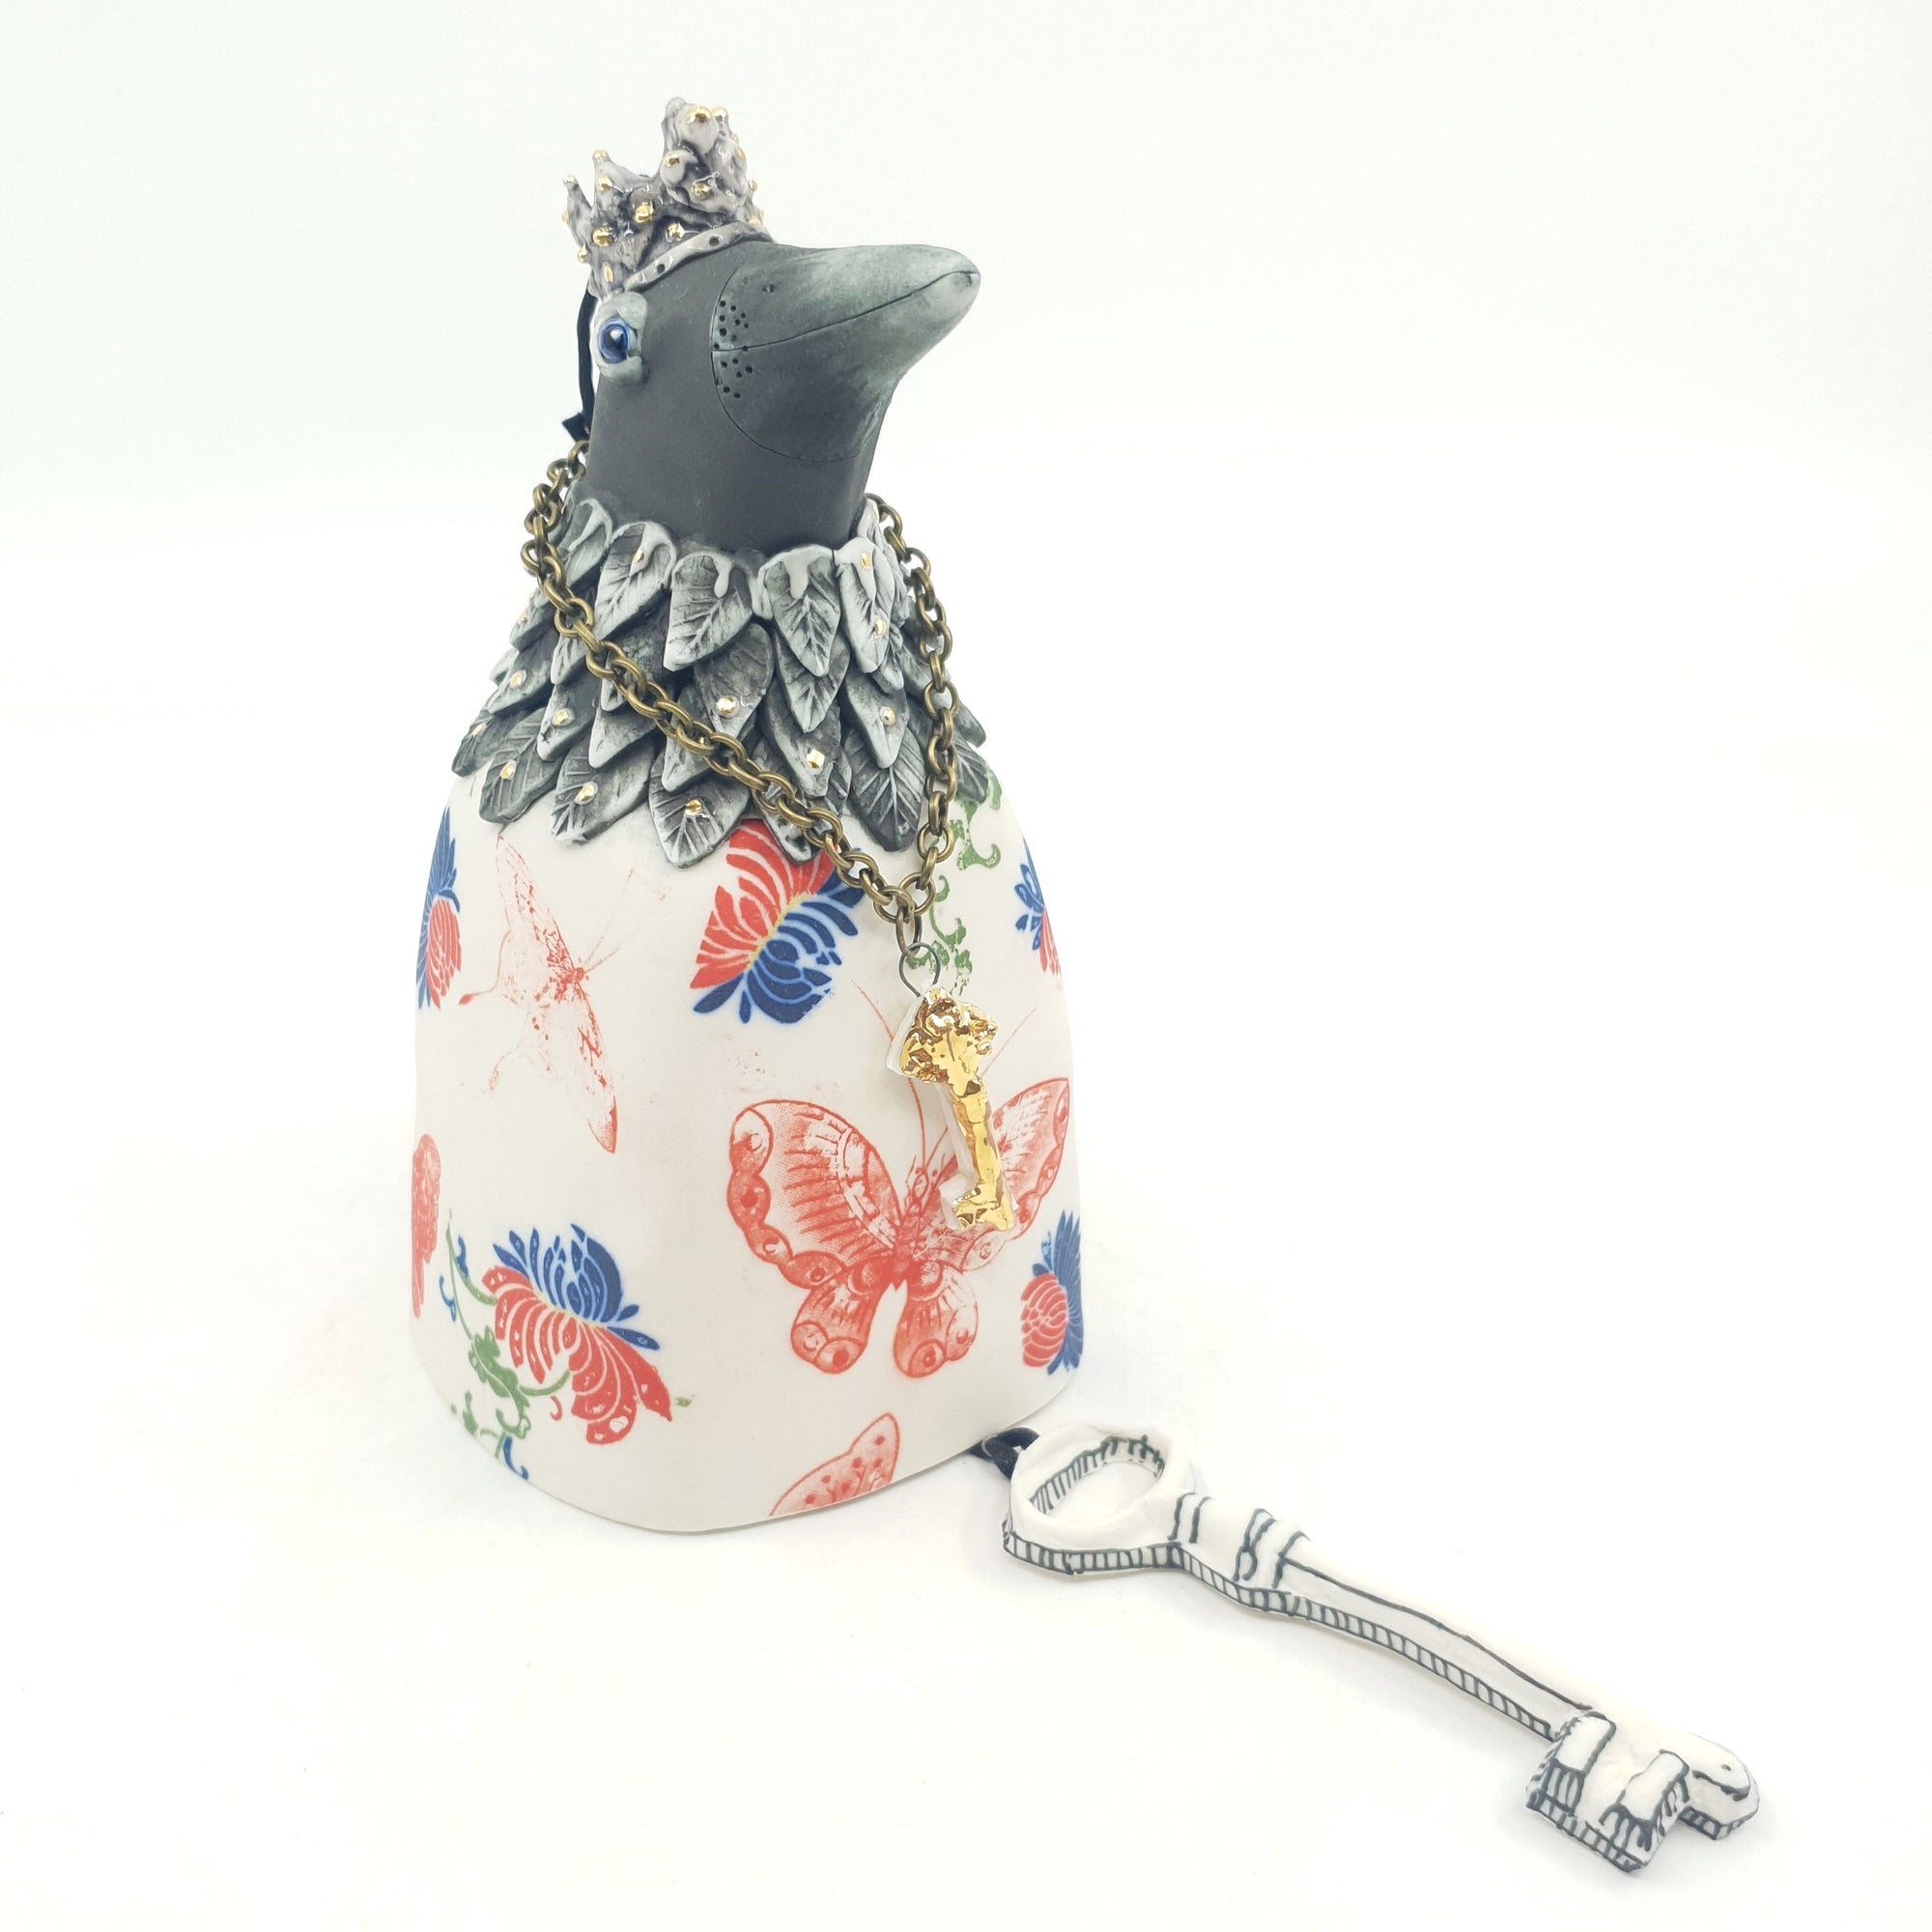 Bird bell with red and blue flowers, red butterflies and gold accents